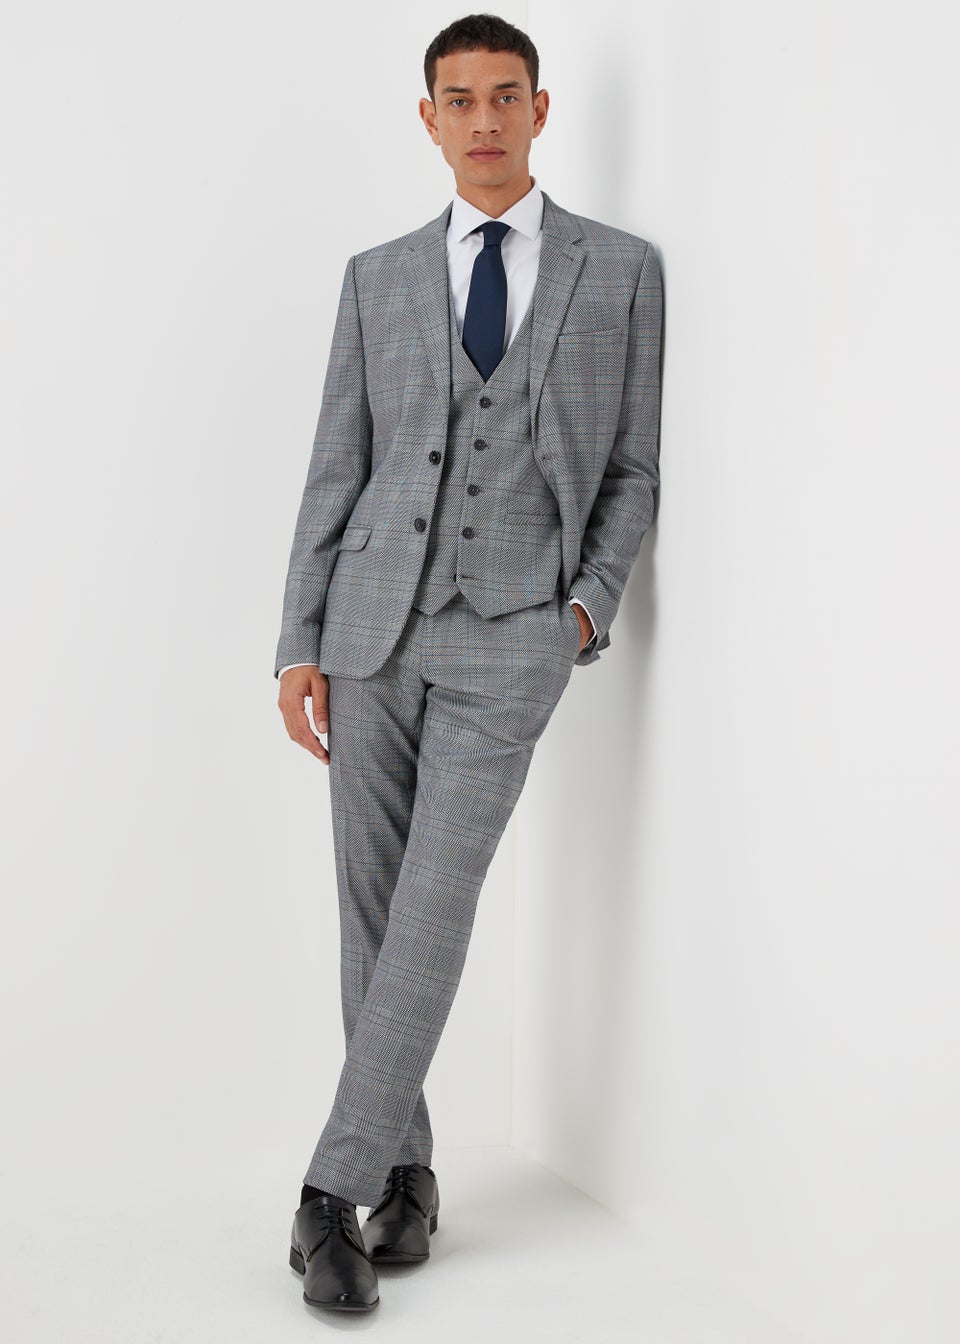 Taylor & Wright Forth Grey Check Skinny Fit Suit Jacket